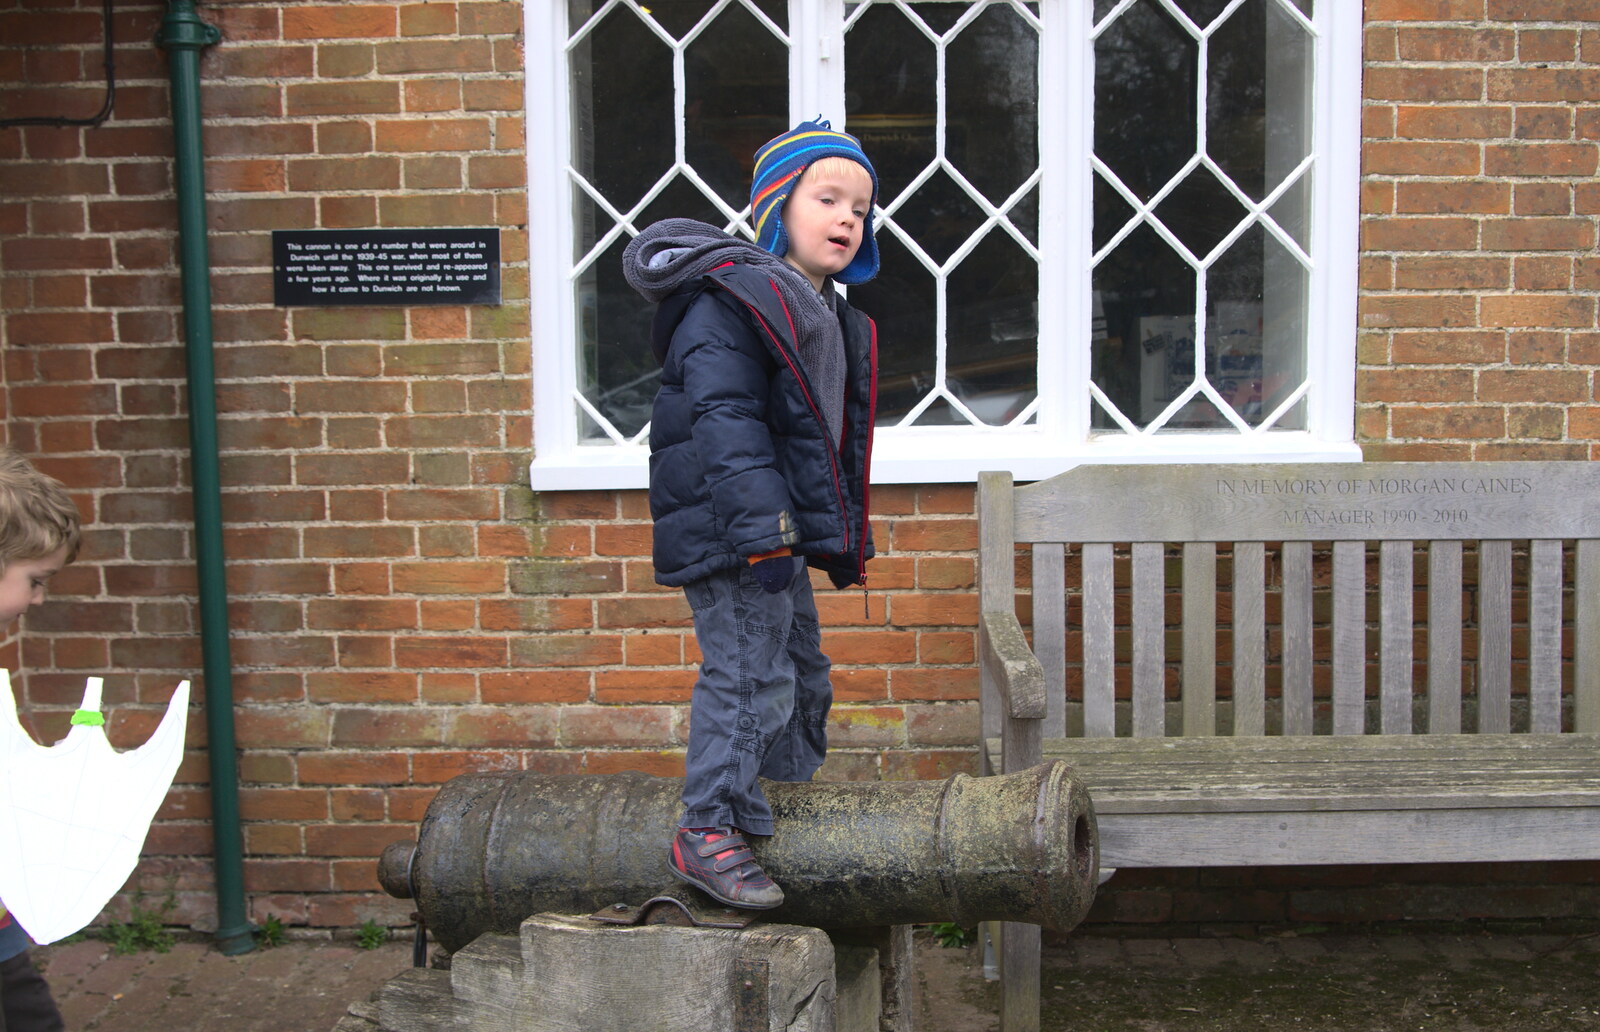 Harry on a cannon from A Day on the Beach, Dunwich, Suffolk - 6th April 2015